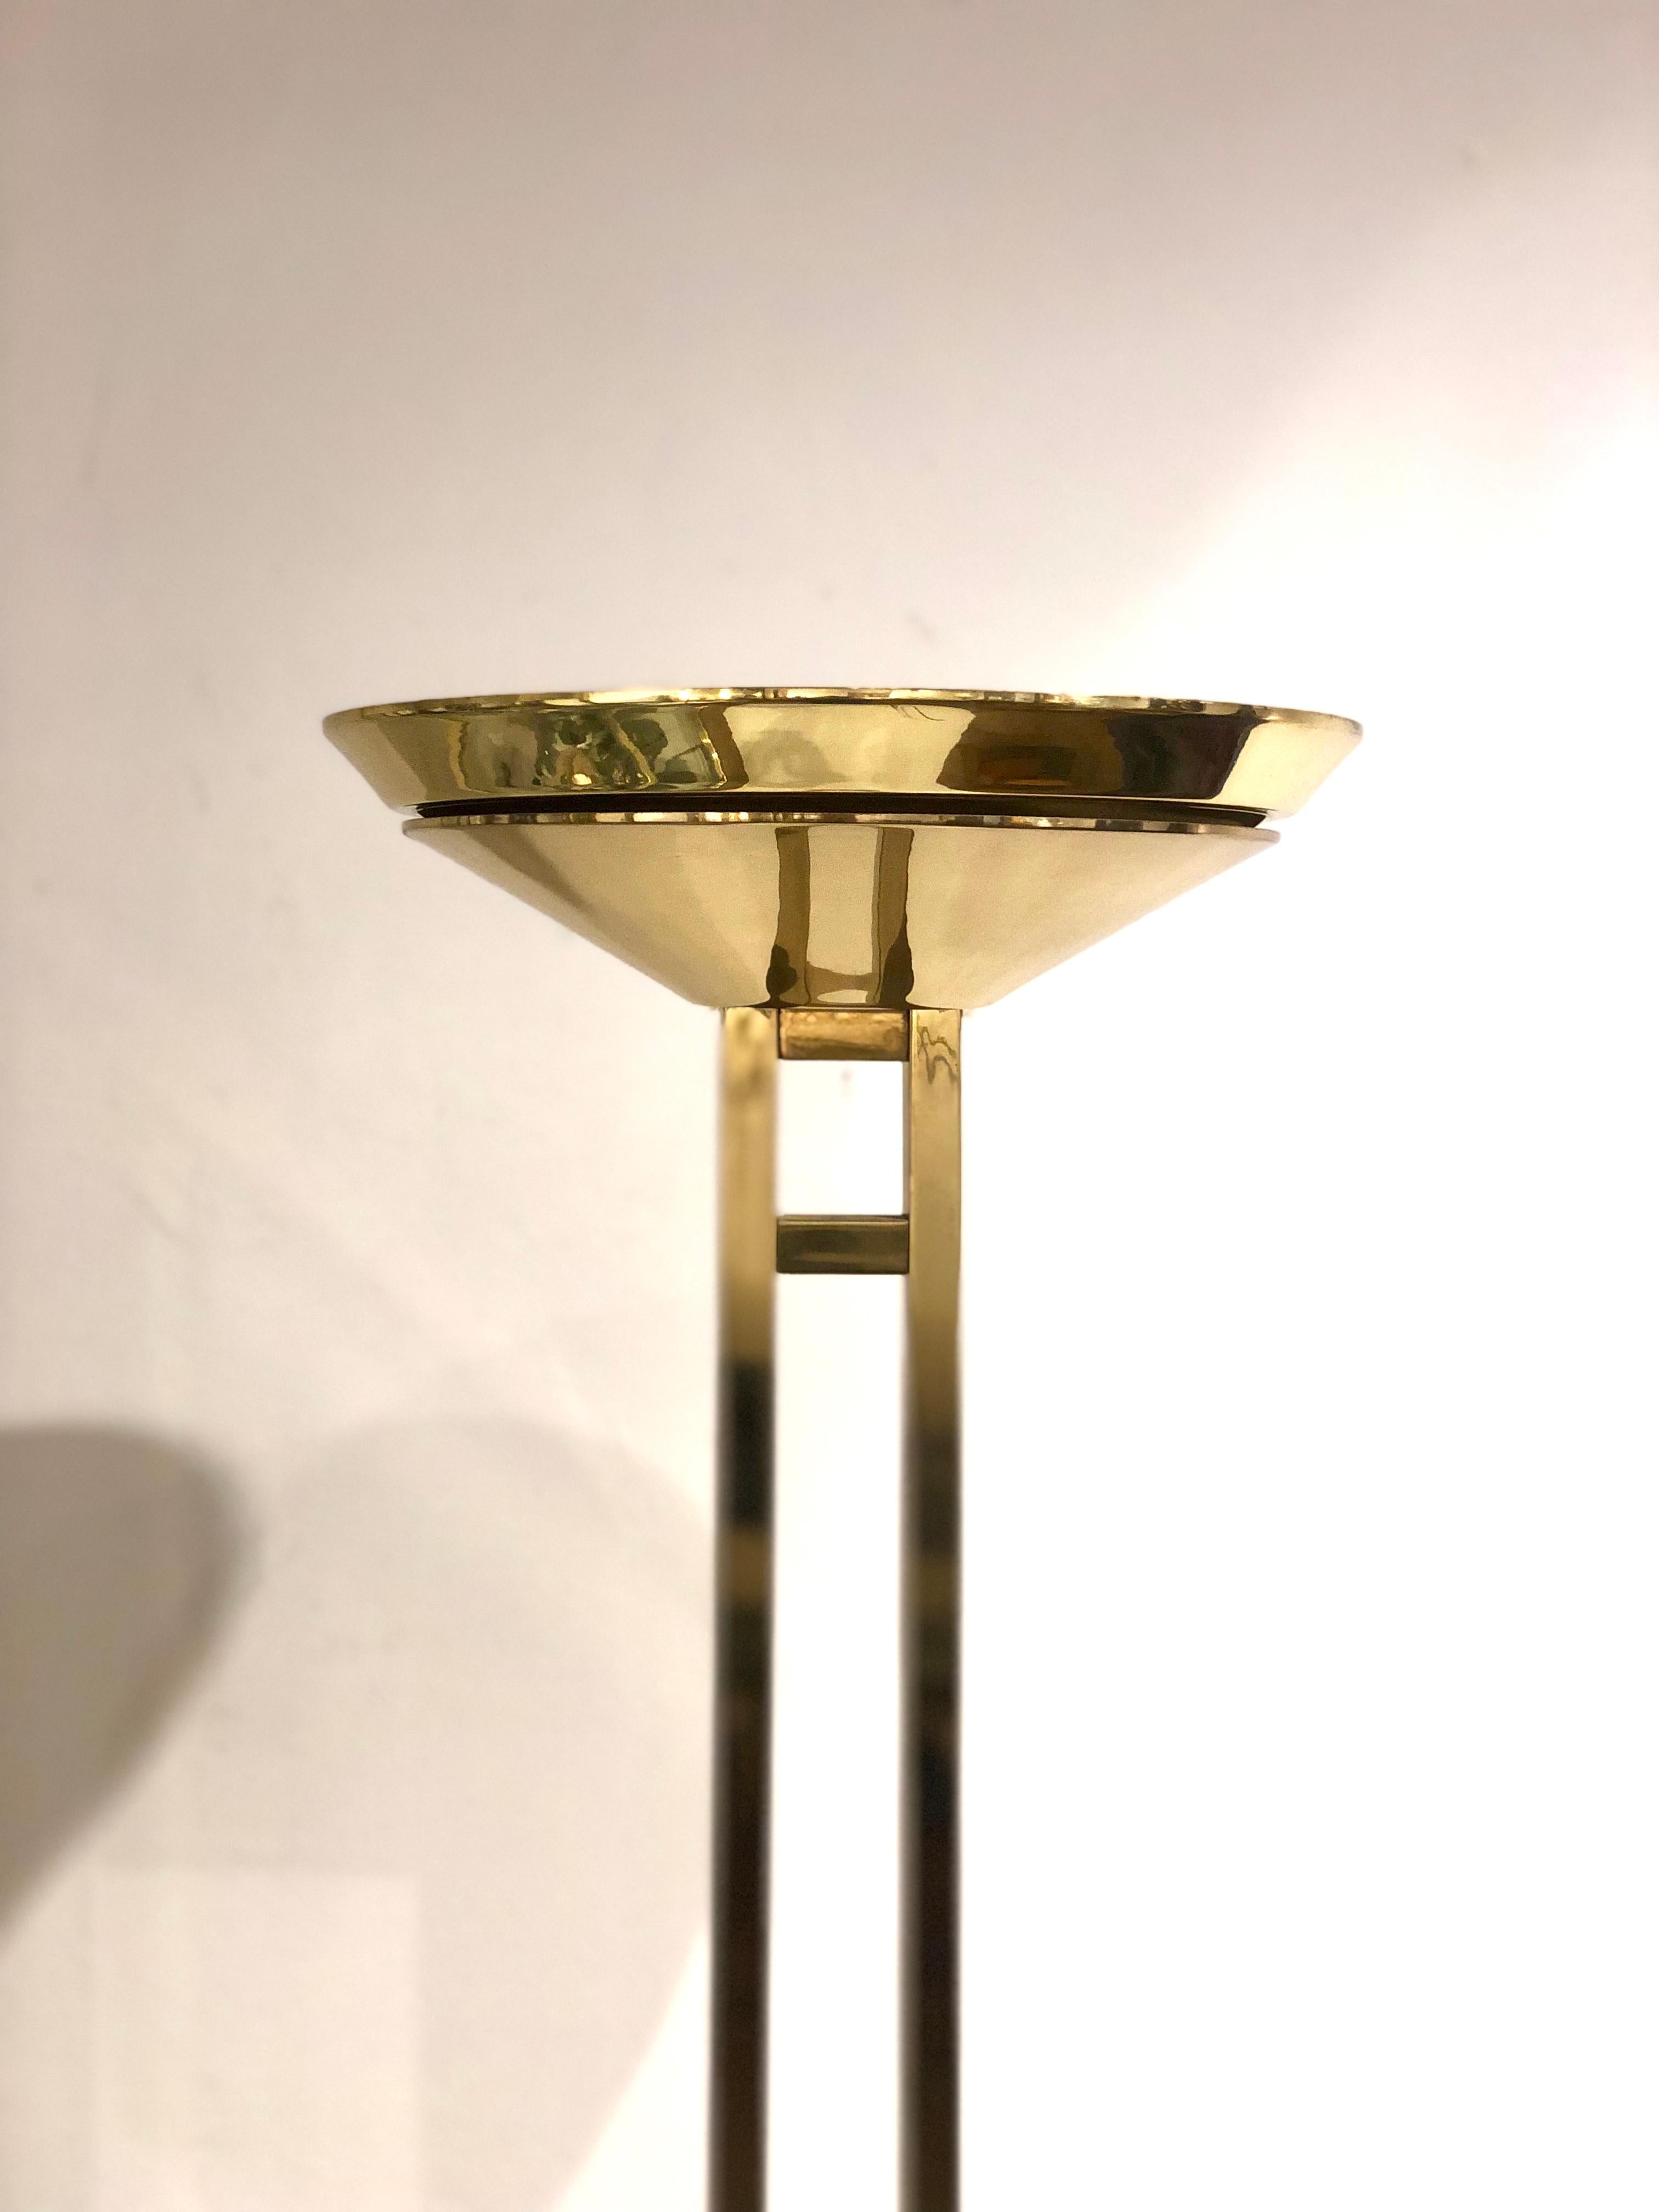 Postmodern polished brass torchiere floor lamp by Forecast Lighting of California circa 1980s nice and heavy the base shows natural patina due to age. Its in perfect condition takes a 250 watt halogen bulb the top of the lamp has a protective